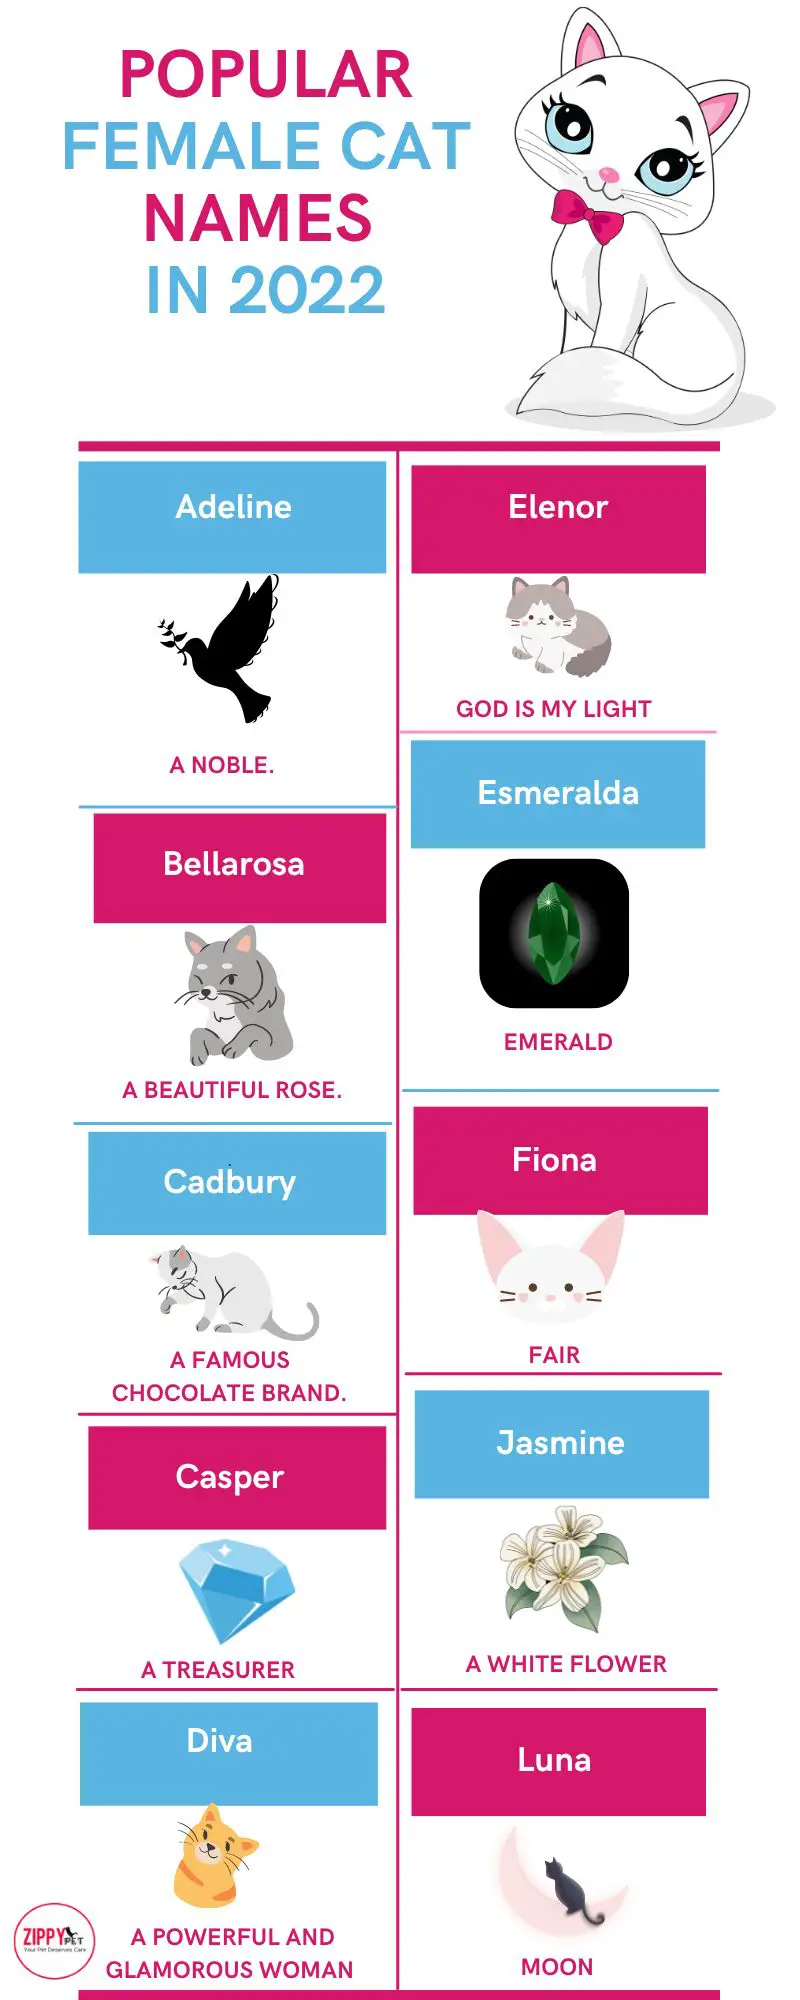 This infographic  shows a list of famous female cat names 